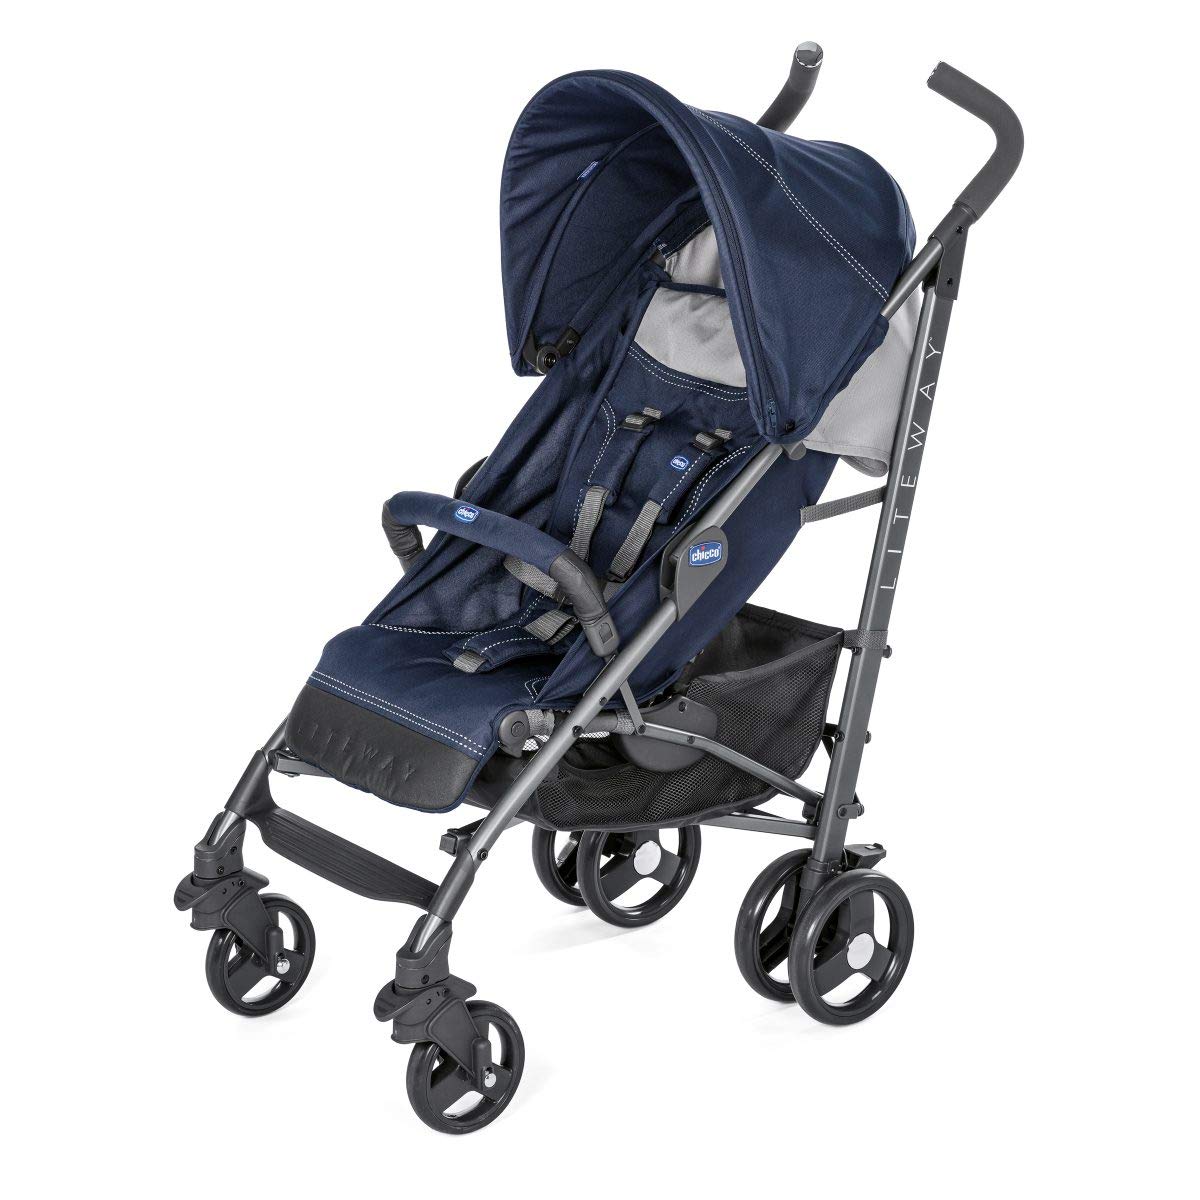 Chicco Liteway 3 Lightweight Foldable Pushchair from 0 Months to 22 kg, Adjustable and Compact Pram with Front Bracket, Sleeping Position, Umbrella Closure, Extendable Hood